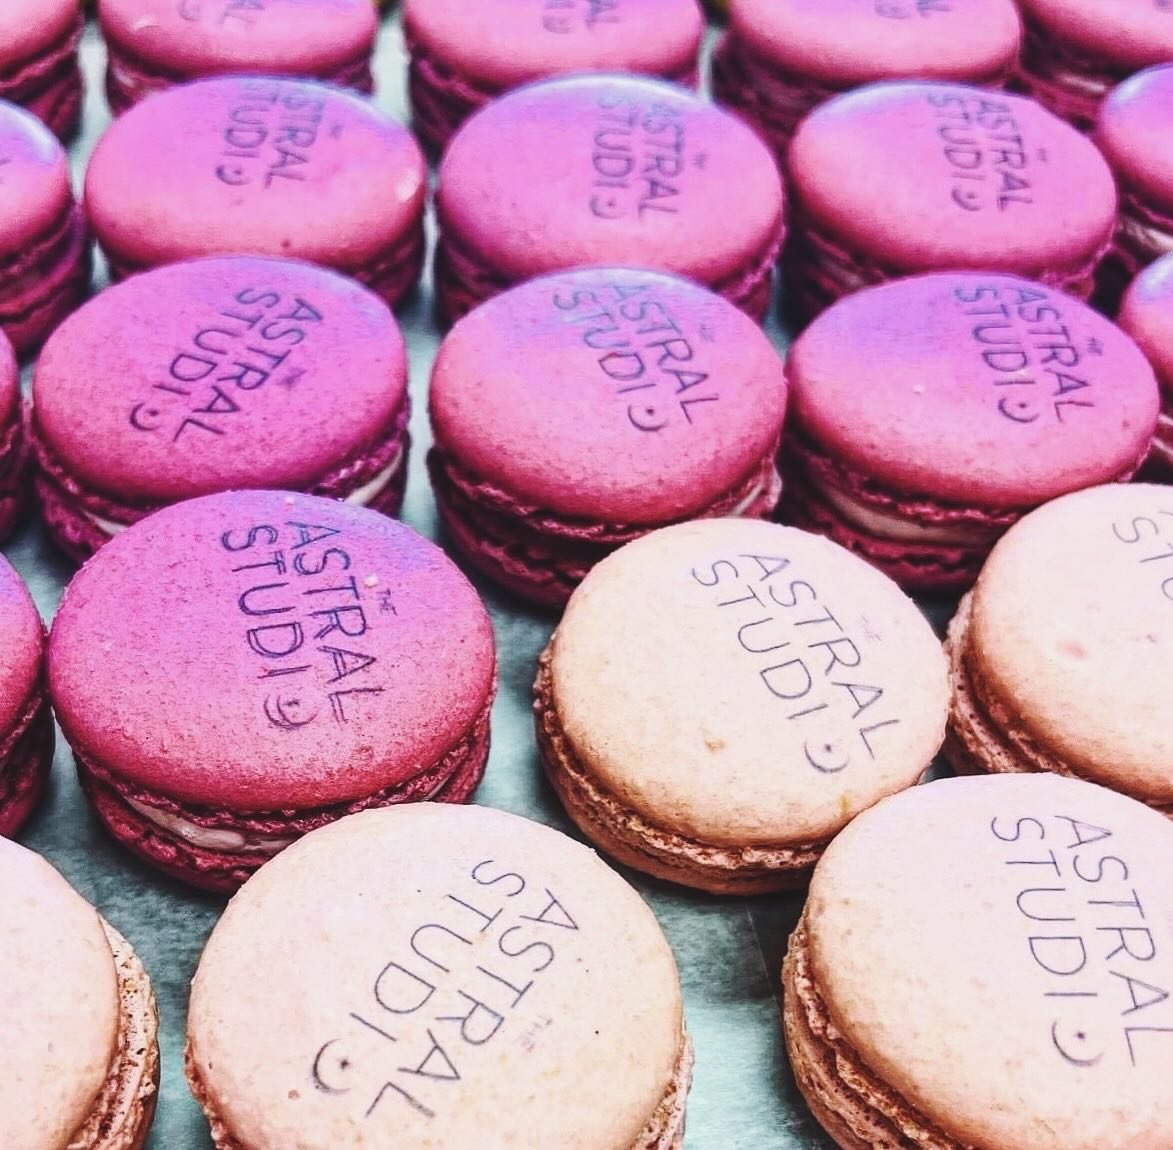 When you are deep diving on a client&rsquo;s socials because you miss them, and see your logo on macarons. 
🌙💖✨